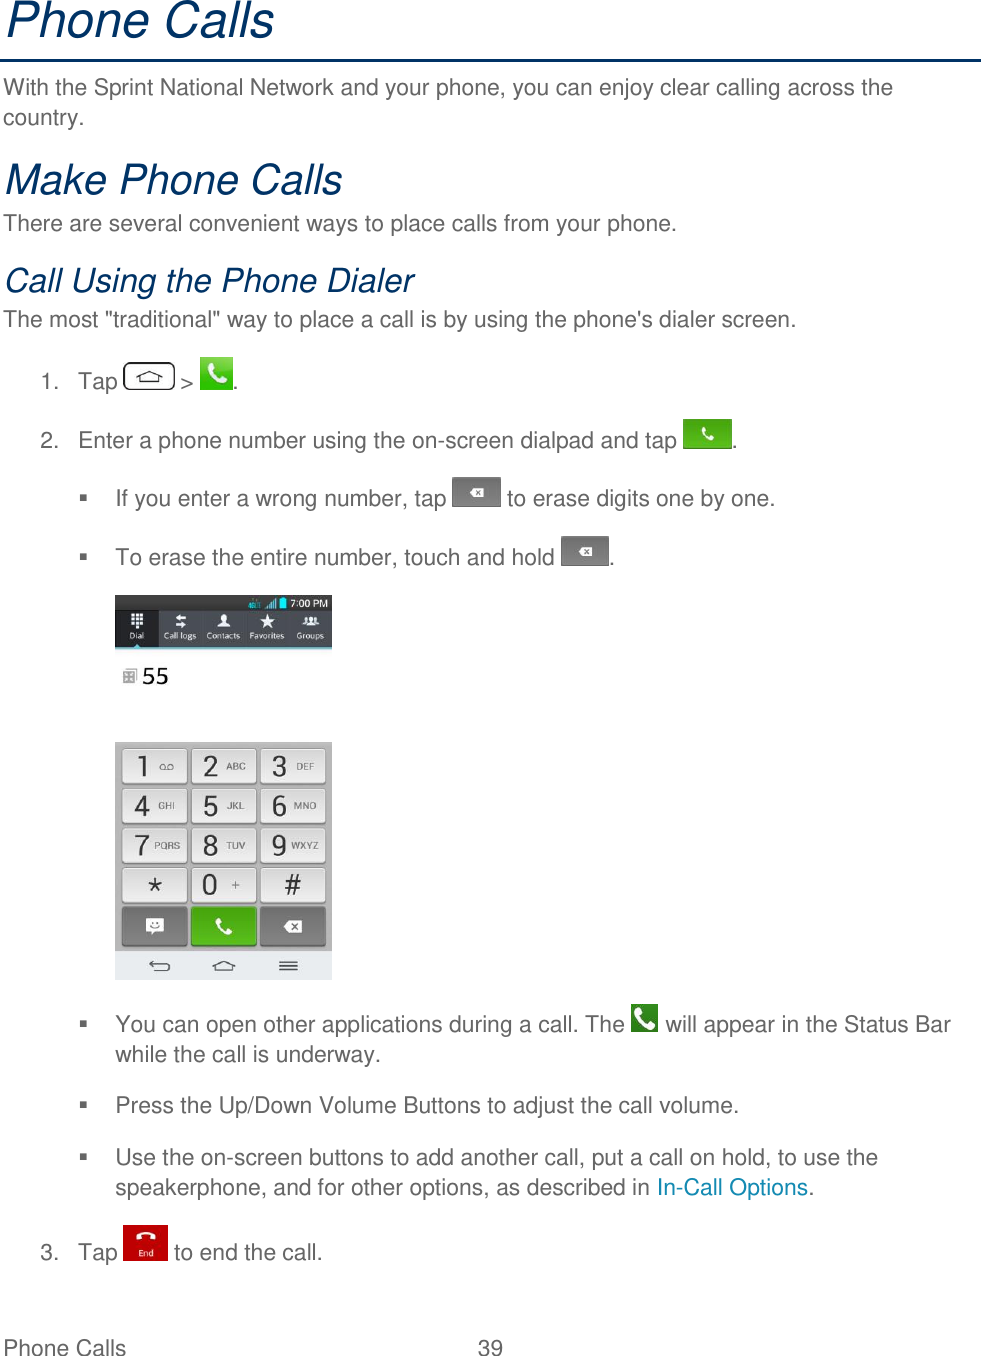  Phone Calls  39   Phone Calls  With the Sprint National Network and your phone, you can enjoy clear calling across the country. Make Phone Calls There are several convenient ways to place calls from your phone. Call Using the Phone Dialer The most &quot;traditional&quot; way to place a call is by using the phone&apos;s dialer screen. 1.  Tap   &gt;  . 2.  Enter a phone number using the on-screen dialpad and tap  .   If you enter a wrong number, tap   to erase digits one by one.   To erase the entire number, touch and hold  .    You can open other applications during a call. The   will appear in the Status Bar while the call is underway.   Press the Up/Down Volume Buttons to adjust the call volume.   Use the on-screen buttons to add another call, put a call on hold, to use the speakerphone, and for other options, as described in In-Call Options. 3.  Tap   to end the call. 